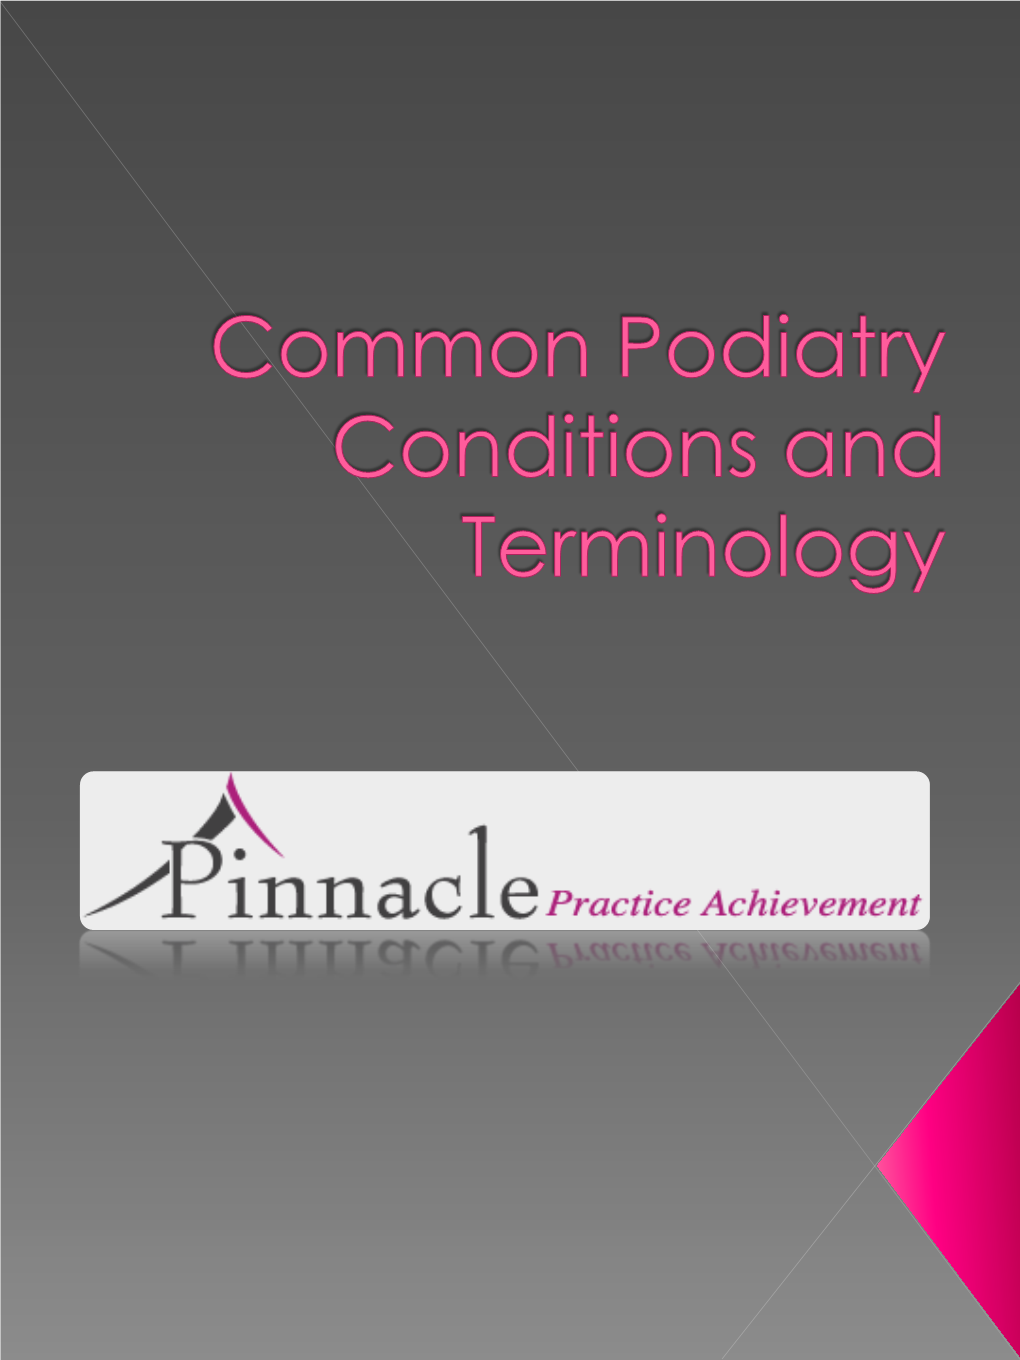 Common Podiatry Conditions and Terminology